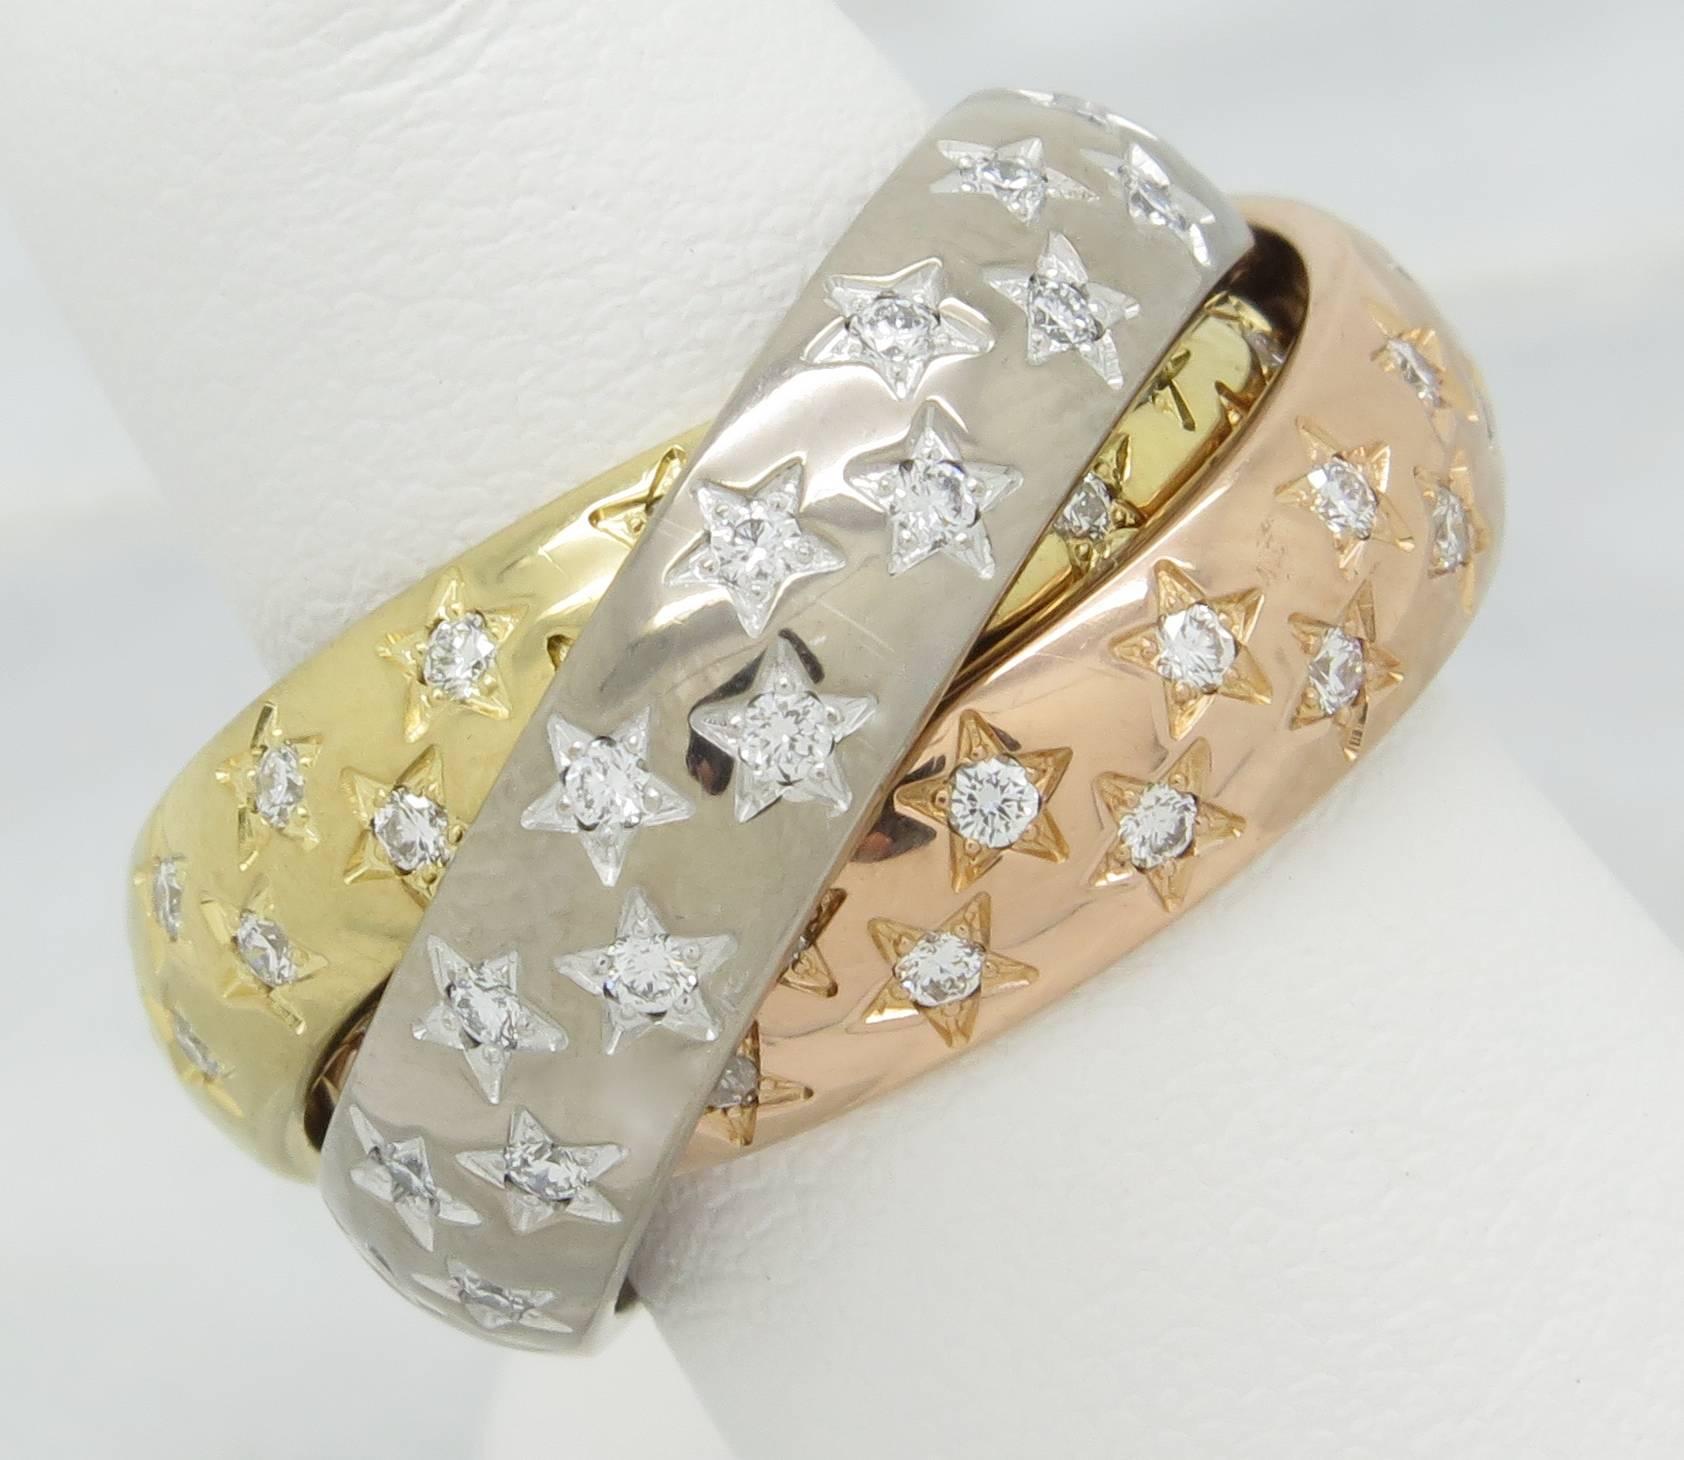 Cartier diamond Trinity ring that features three interlocked bands in 18K white, yellow and rose gold. The ring features 105 Round Brilliant Cut Diamonds. The diamonds have F-H color and VS clarity. The total diamond weight is approximately 1.05CTW.